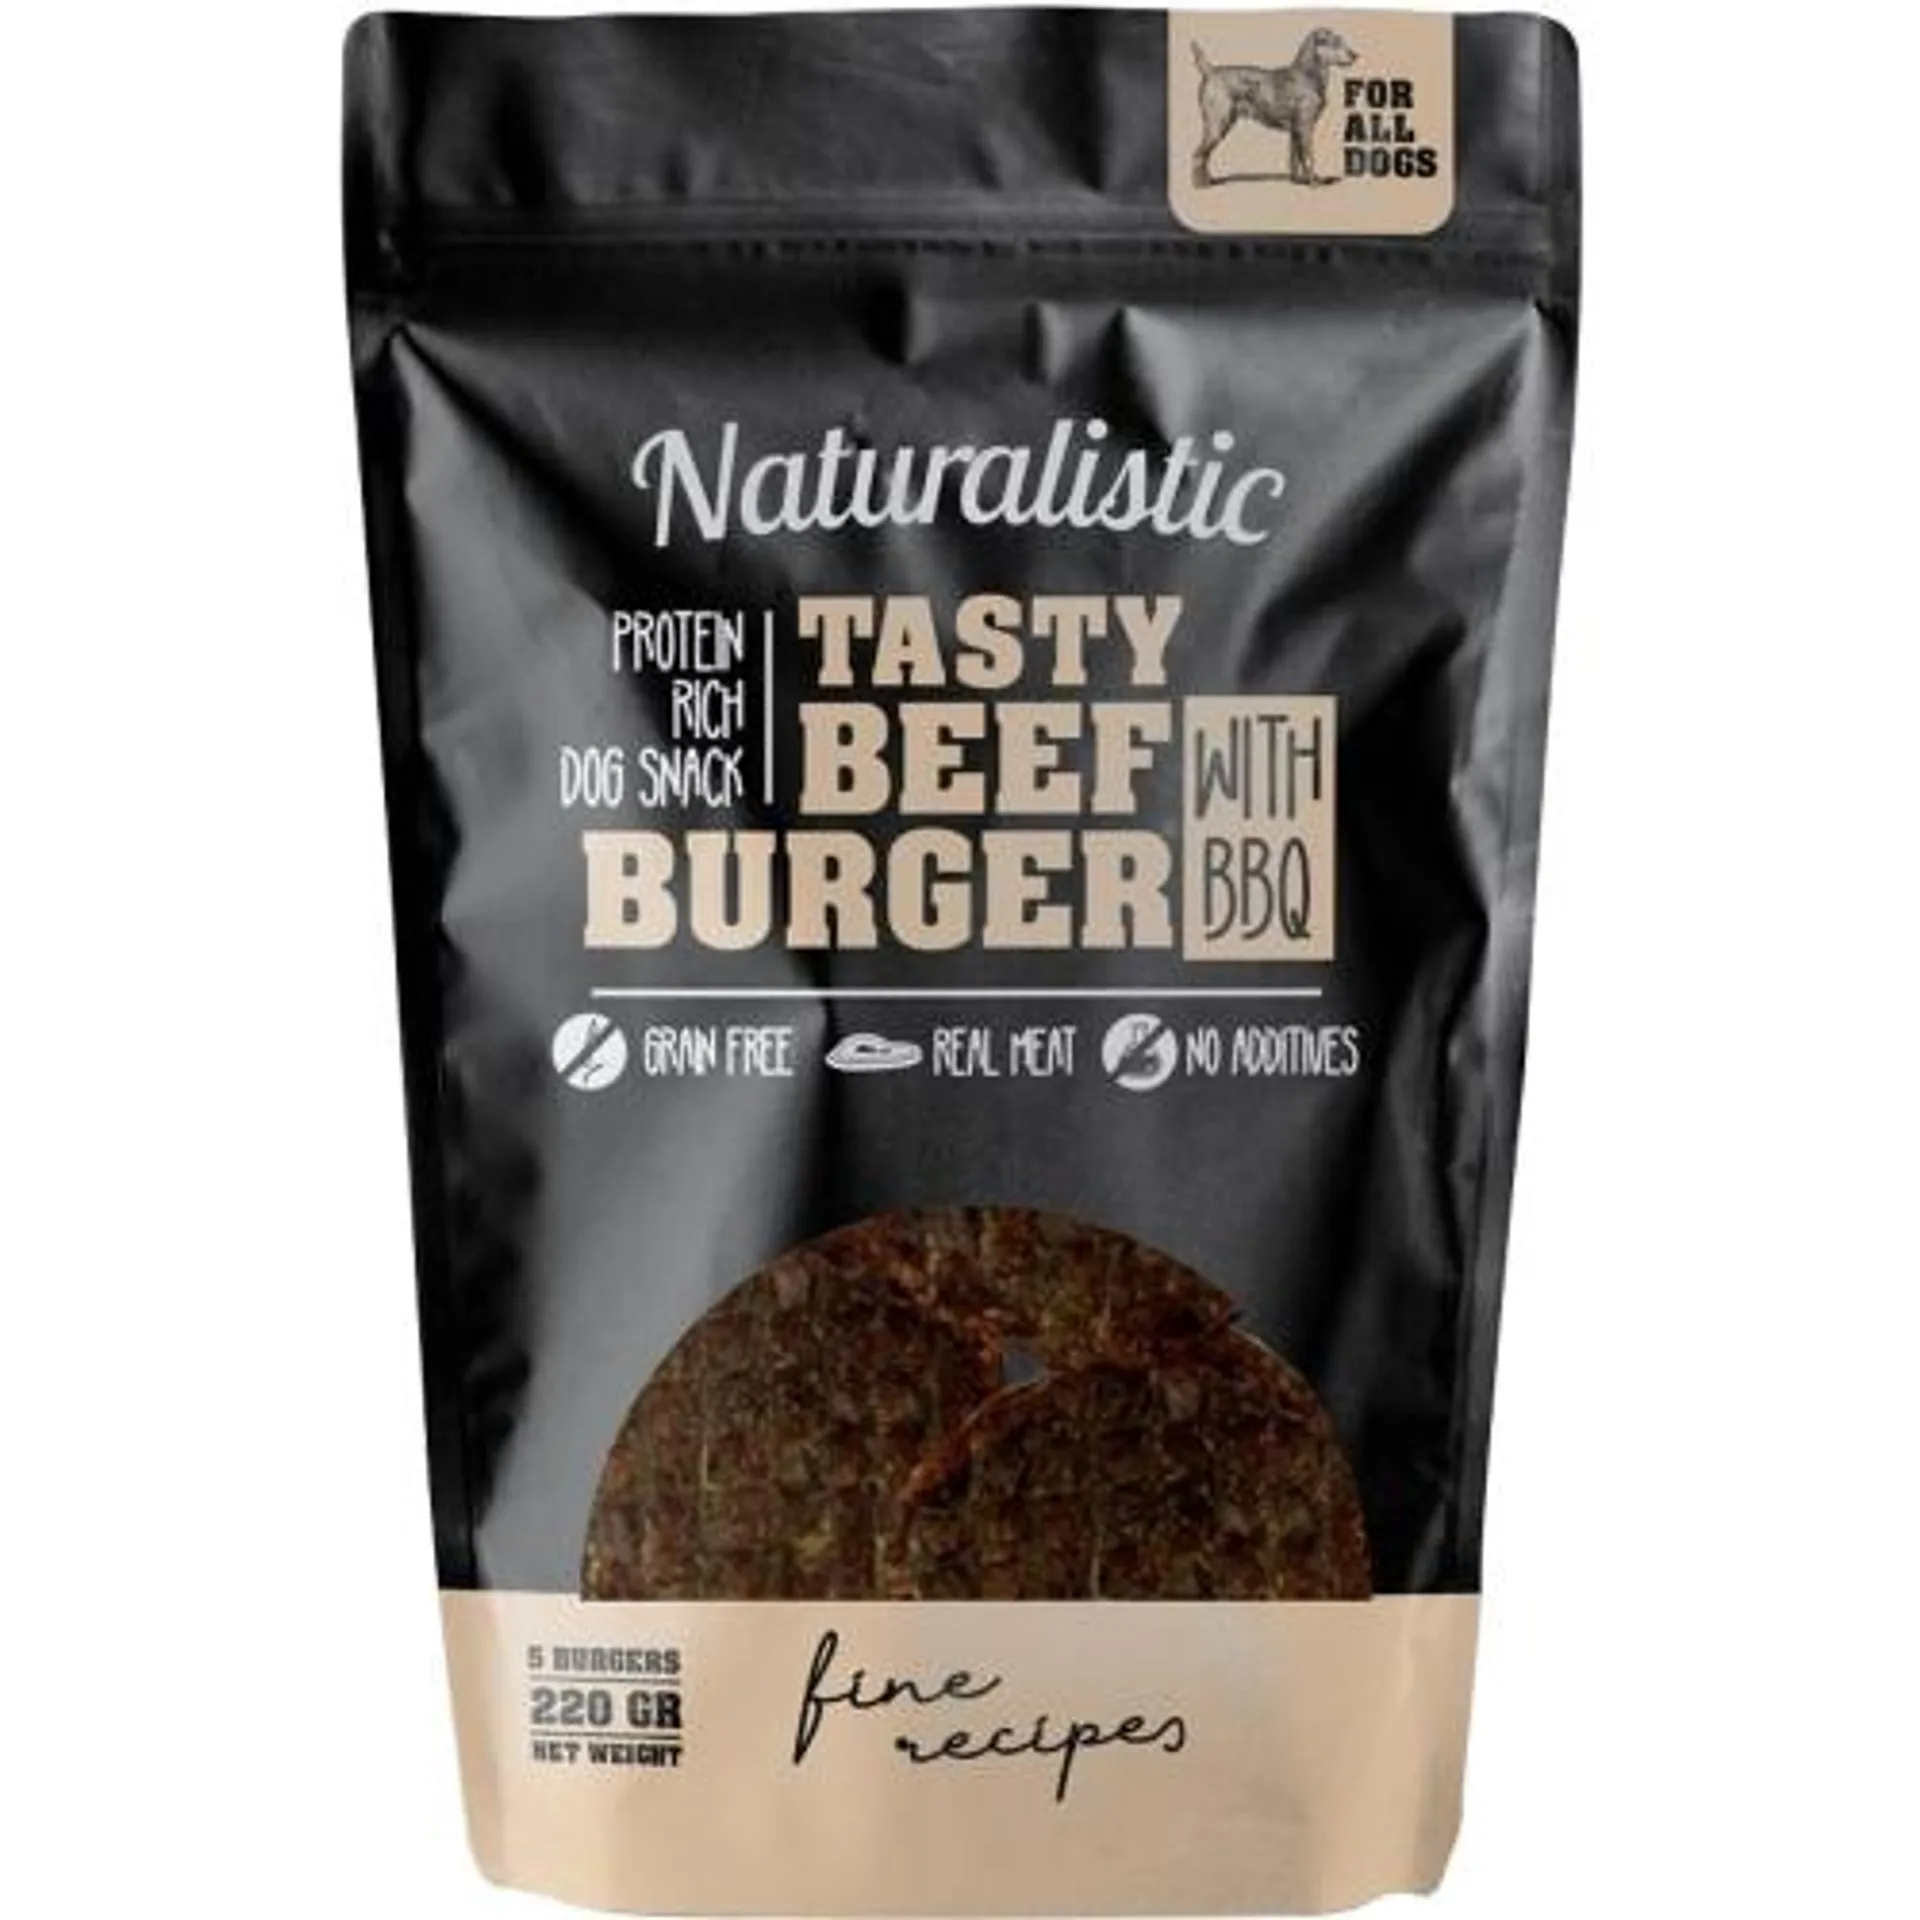 NATURALISTIC TASTY BEEF BURGER WHITH BBQ 220 GR, 5 UN